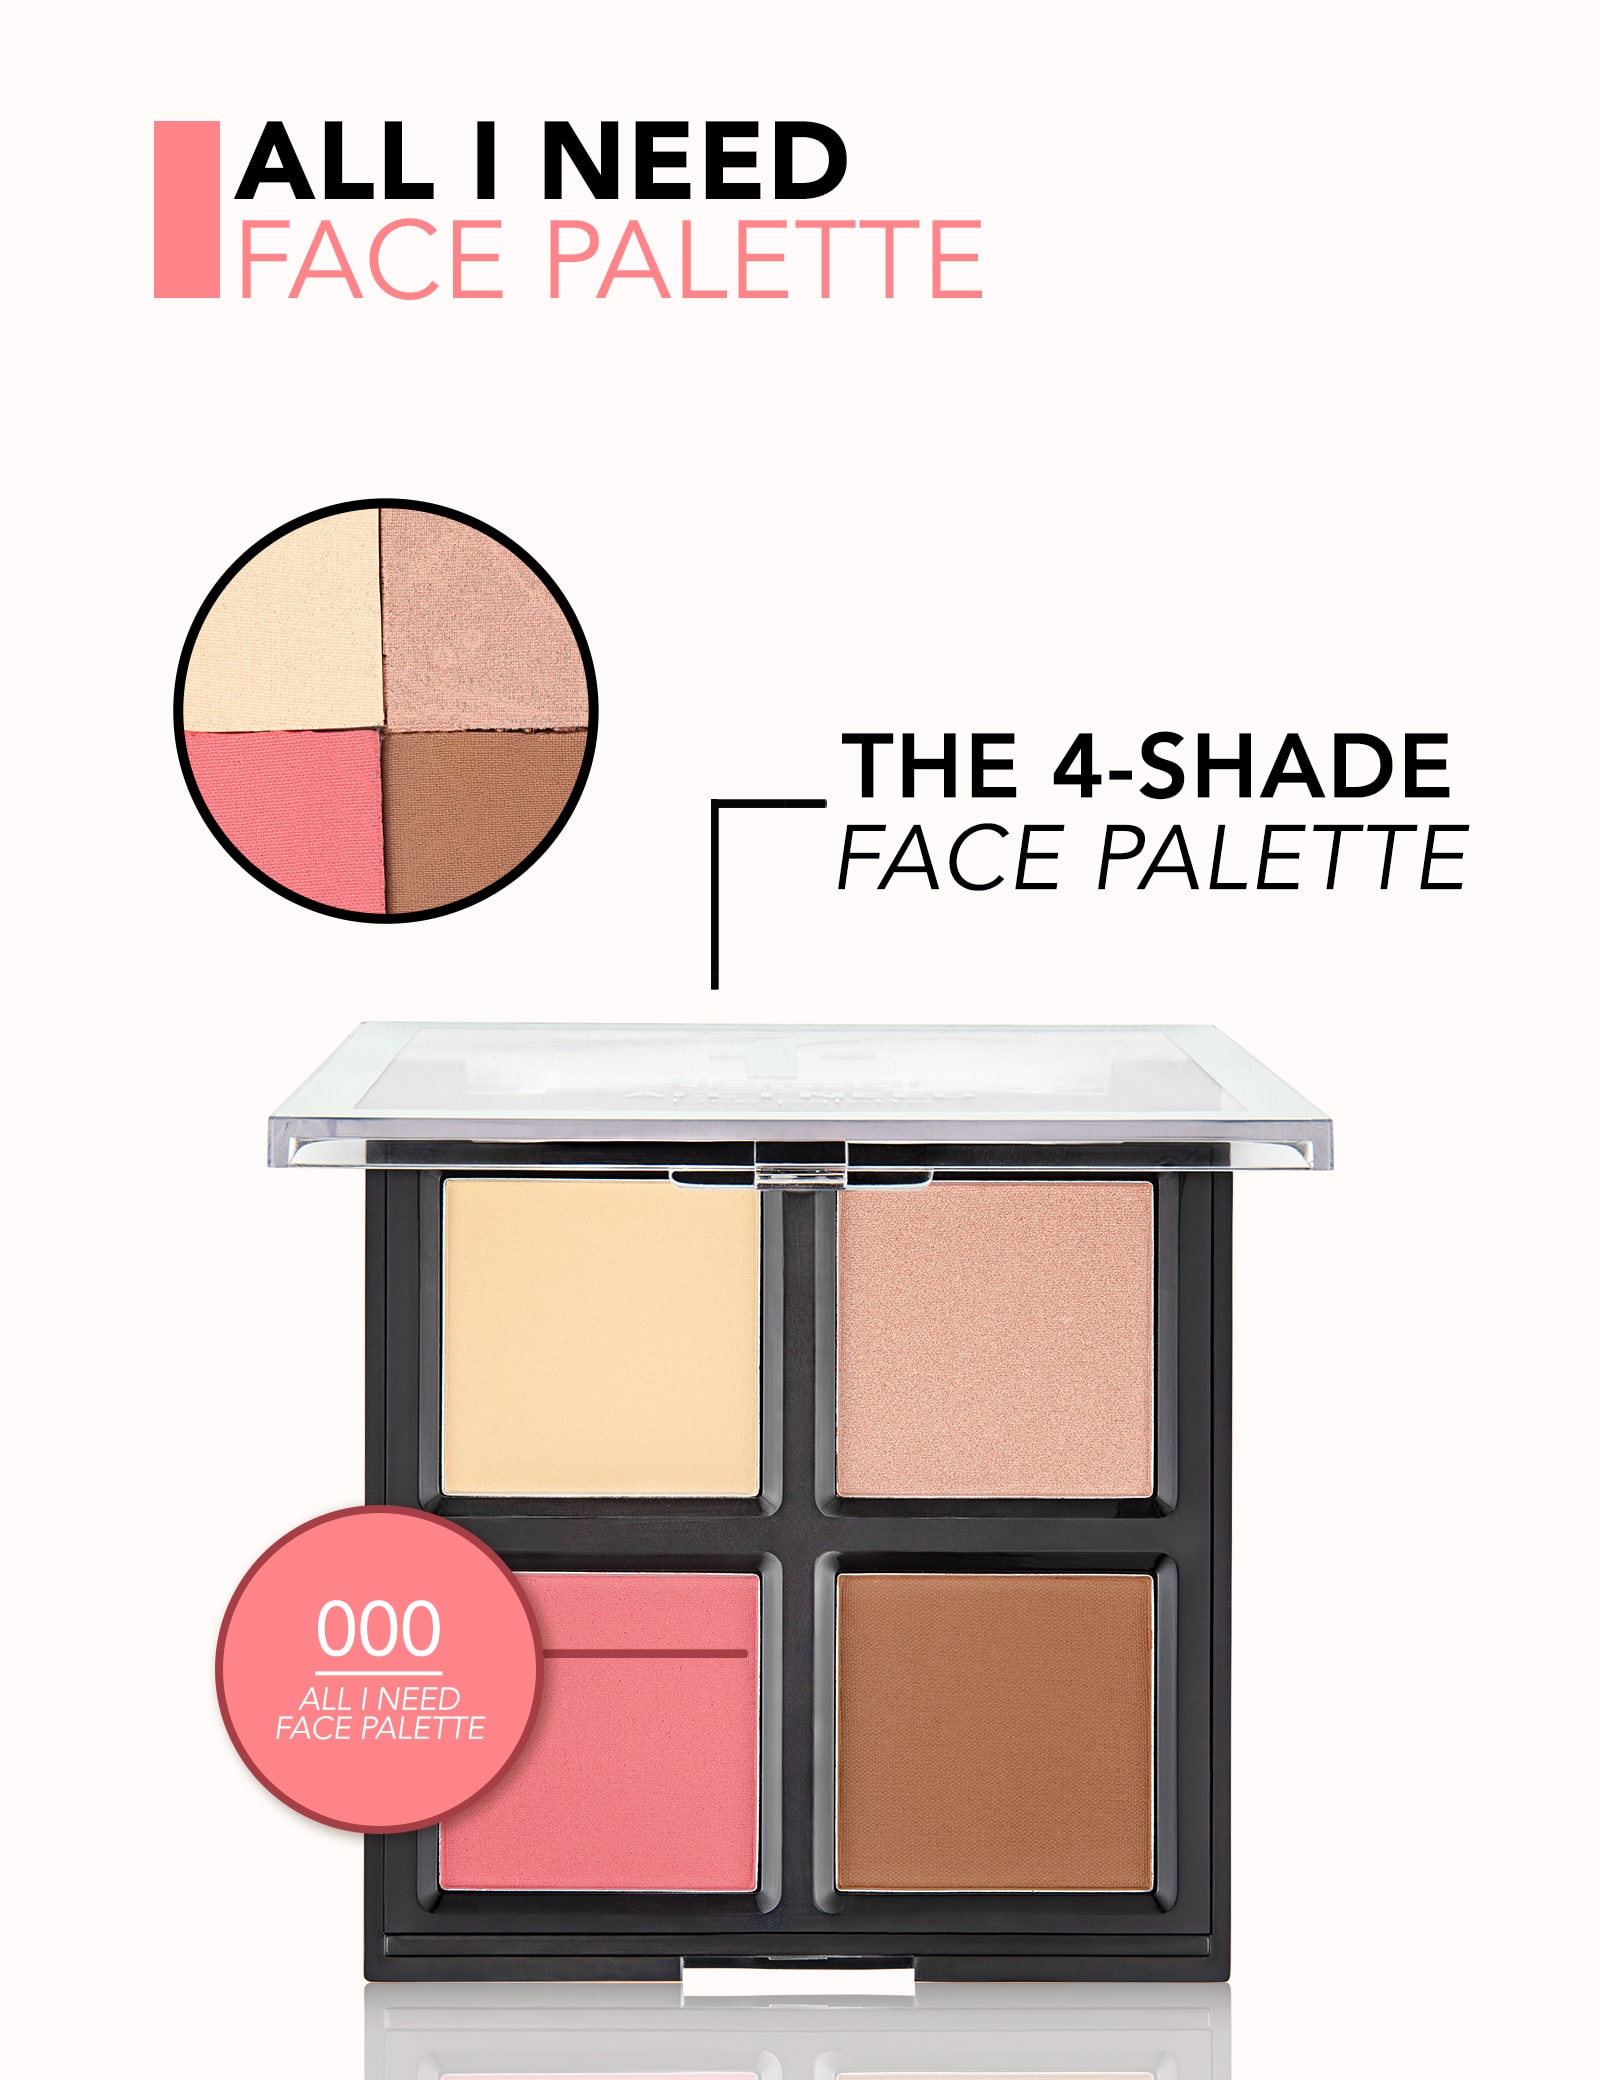 All I Need Face Palette